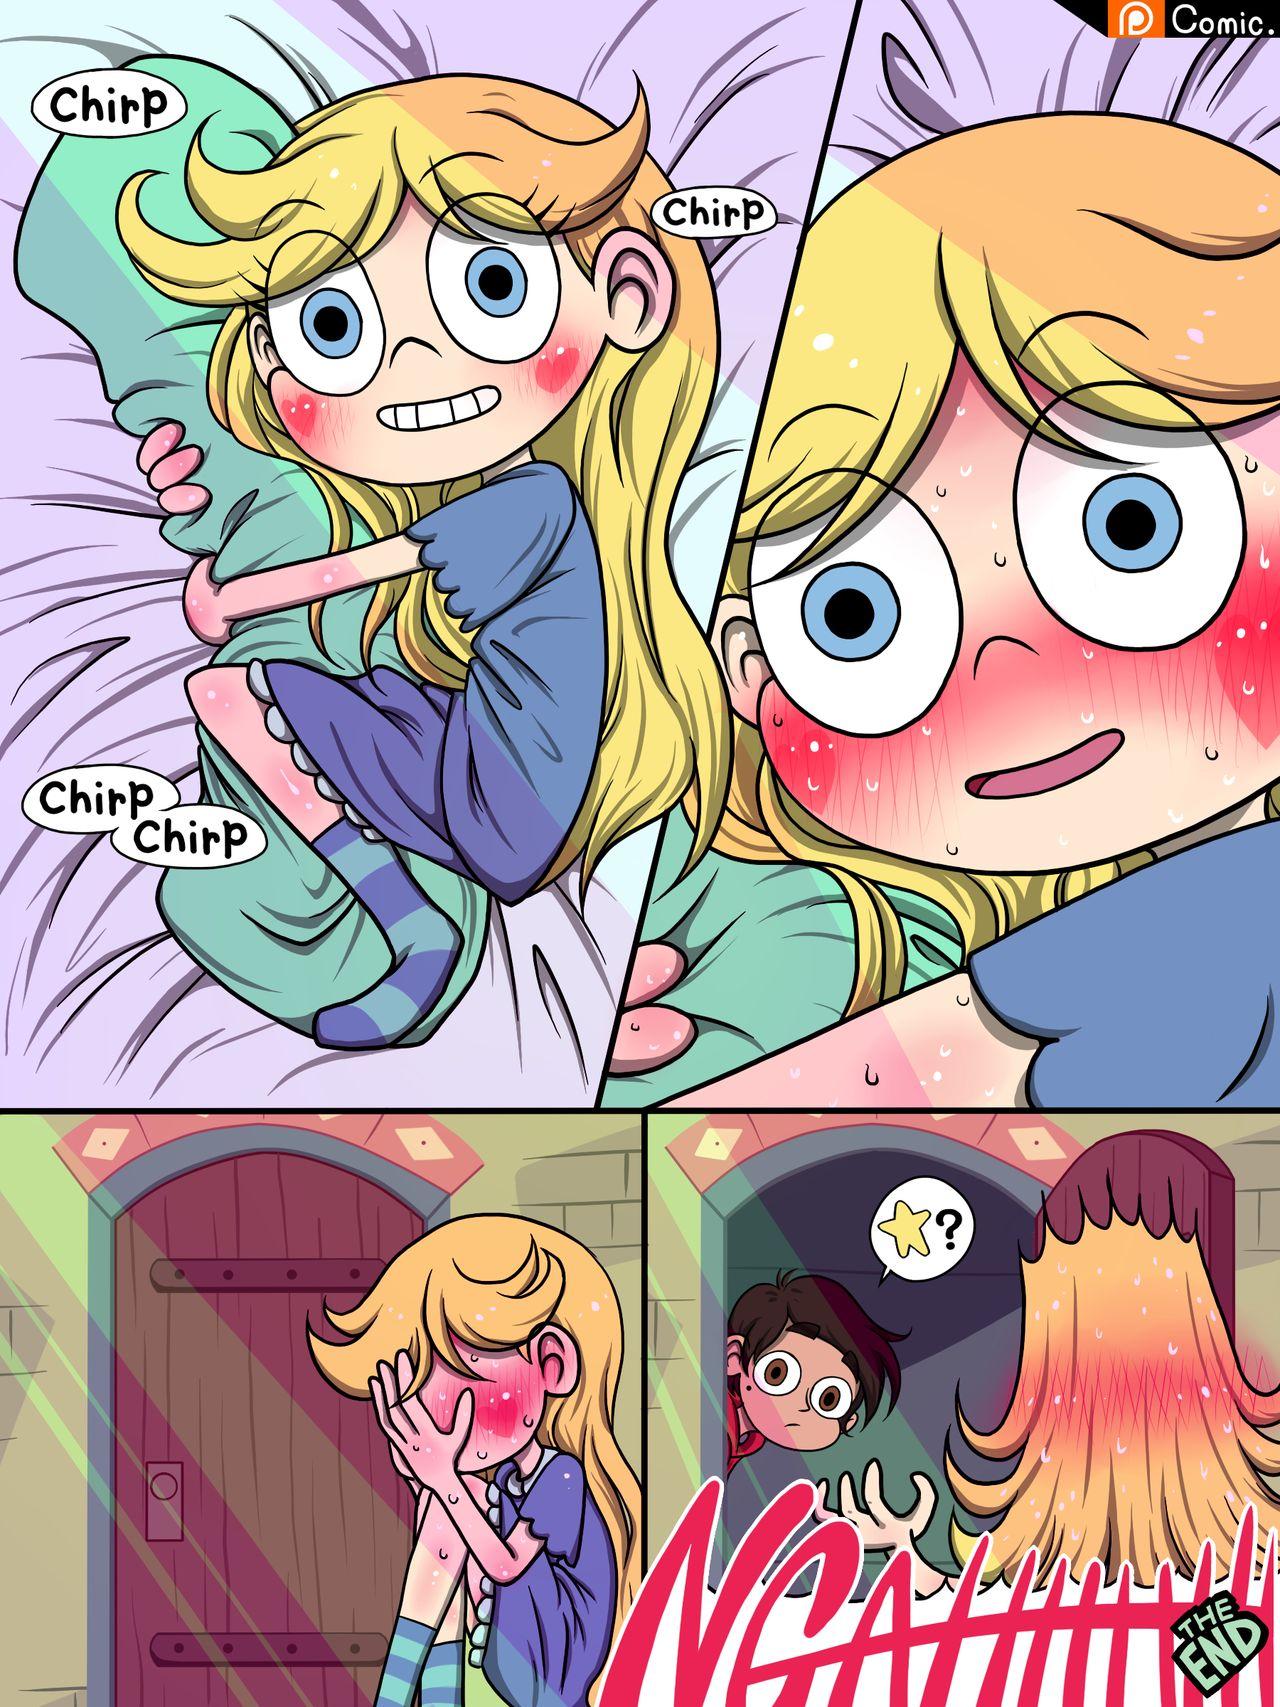 Latex Foces of Dream - Star vs. the forces of evil Chile - Page 8